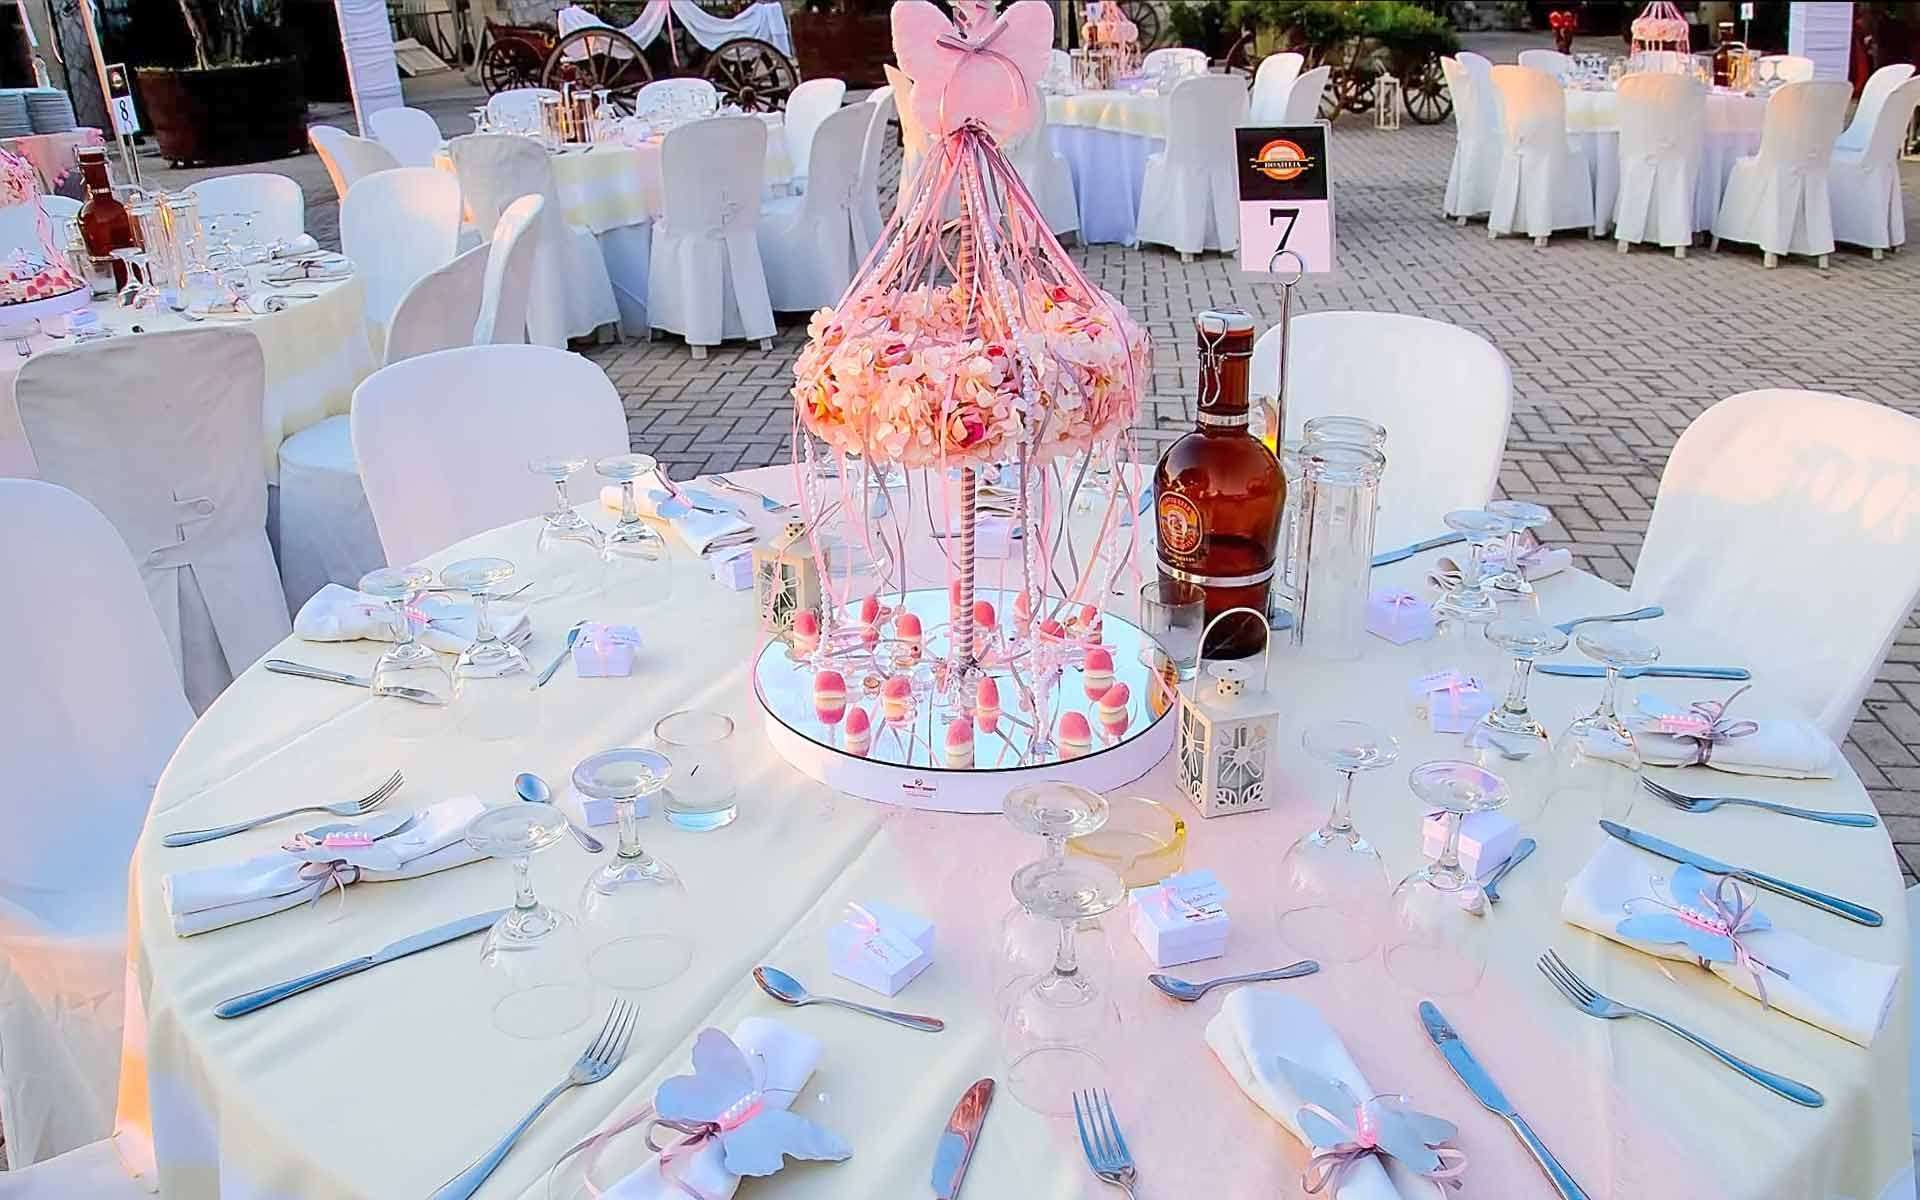 Table-Decoration-With-Pink-Carousel-In-Shades-Of-Pink-With-Floral-Wreath-And-Pink-Ribbons